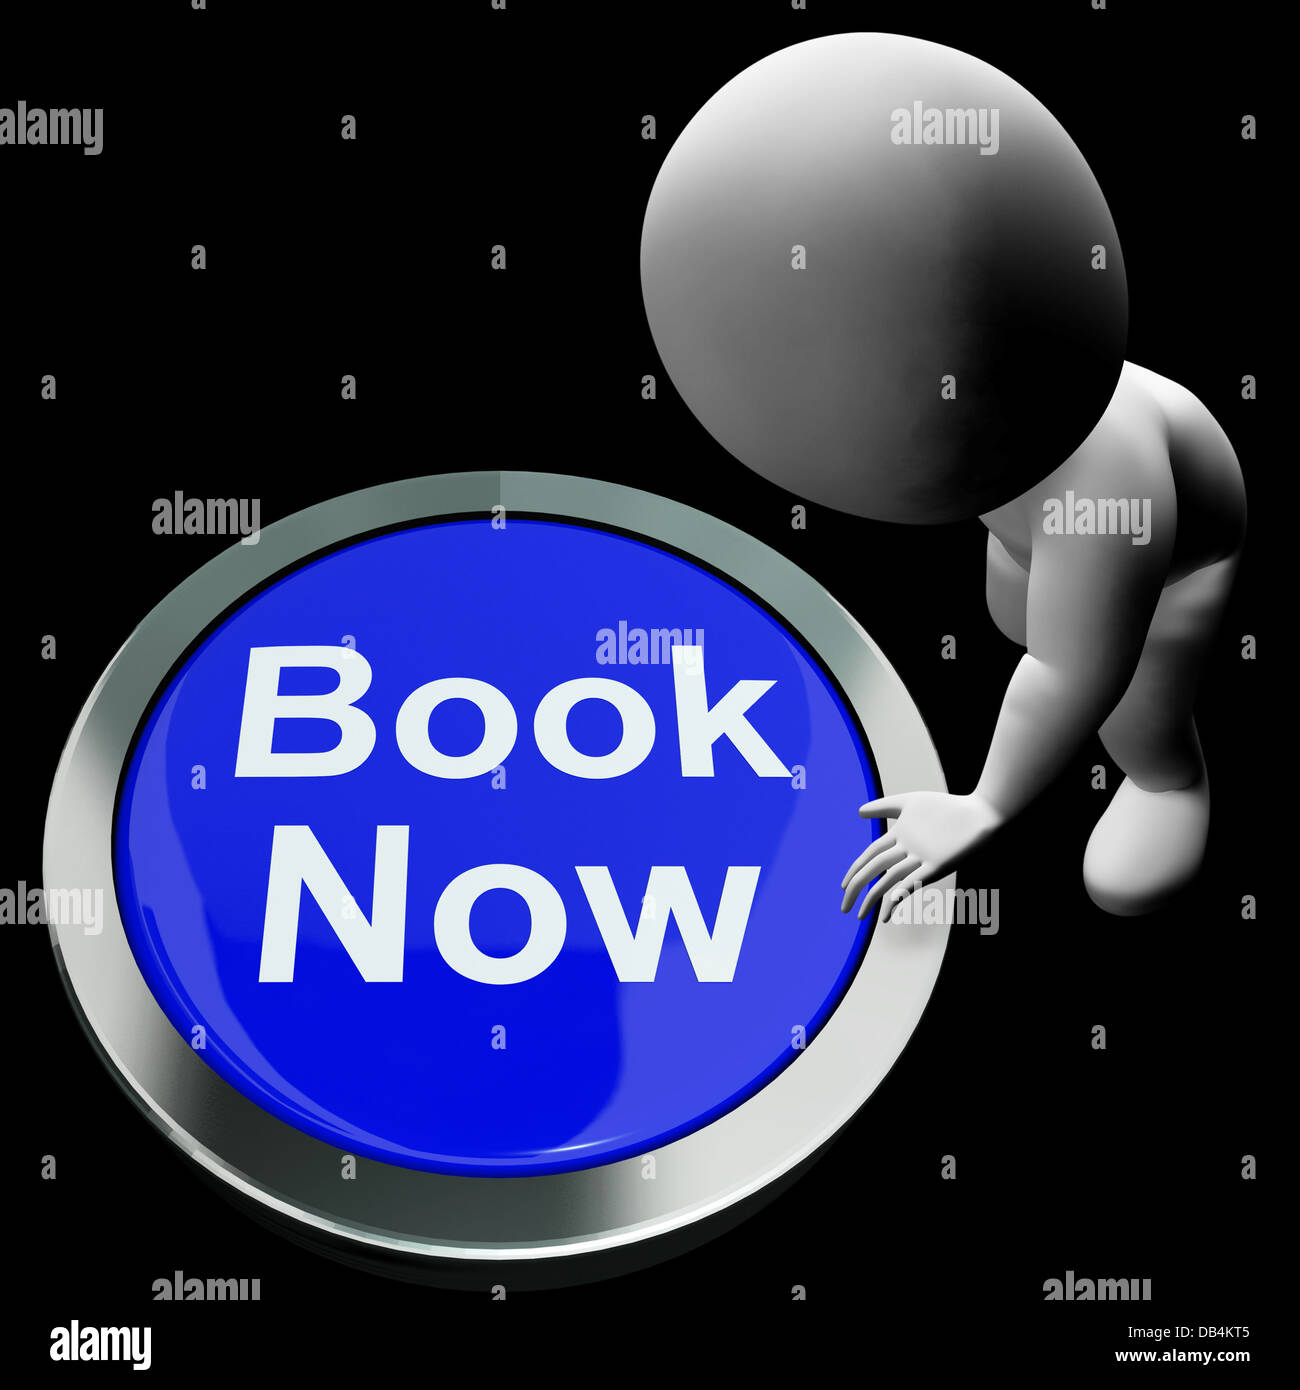 Blue Book Now Button For Hotel Or Flights Reservation Stock Photo